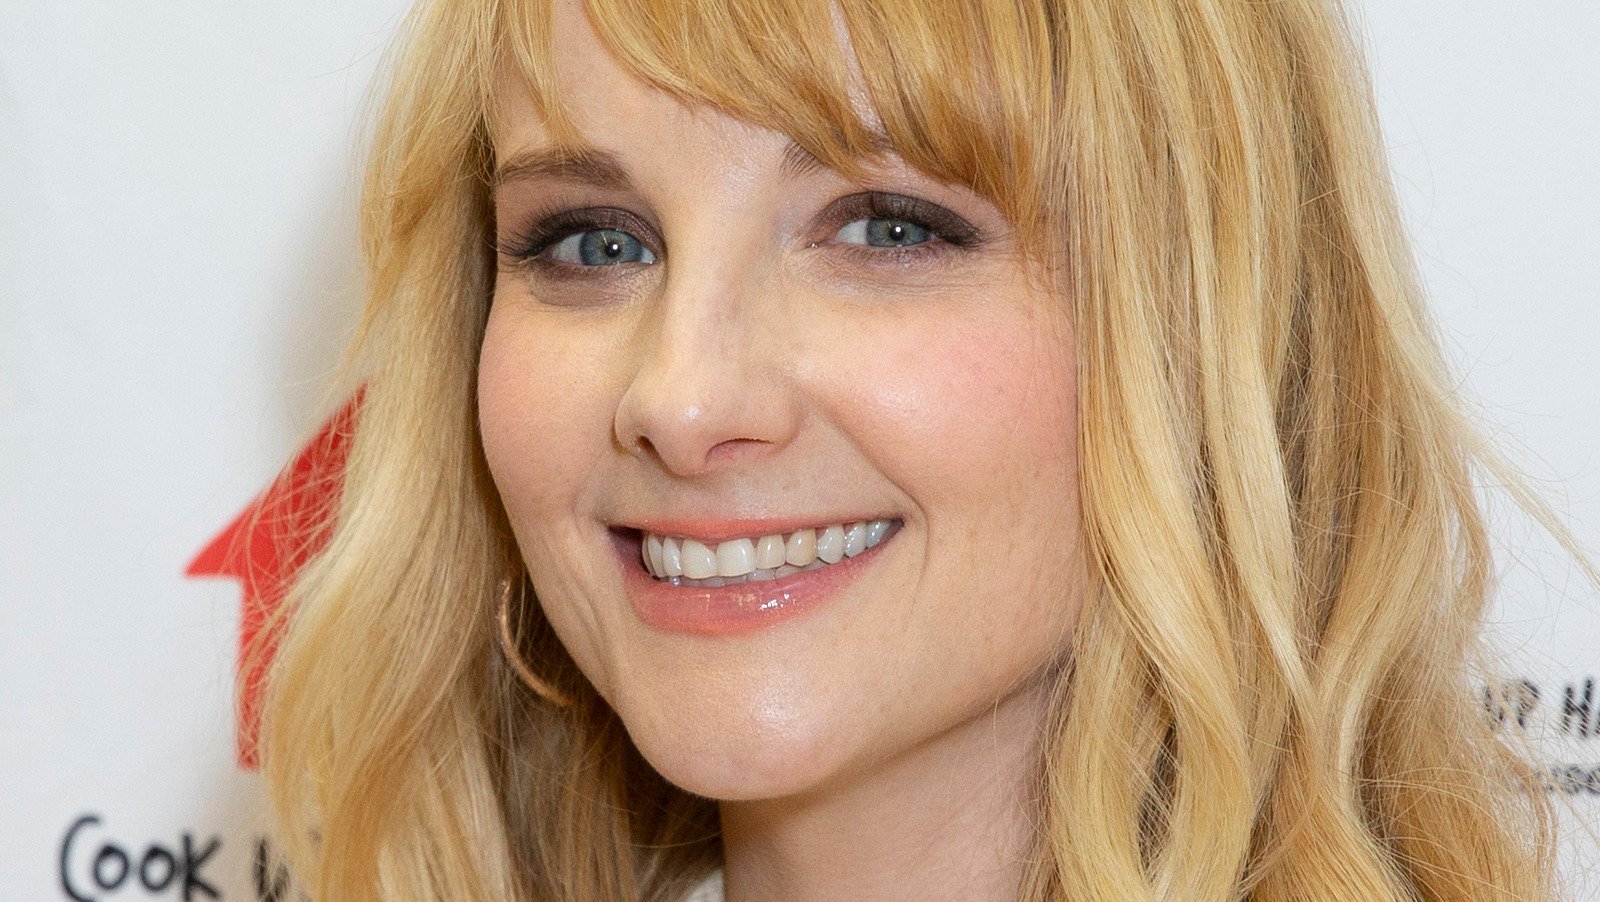 The Office Character Only Hardcore Fans Know The Big Bang Theory's Melissa Rauch Played - Looper